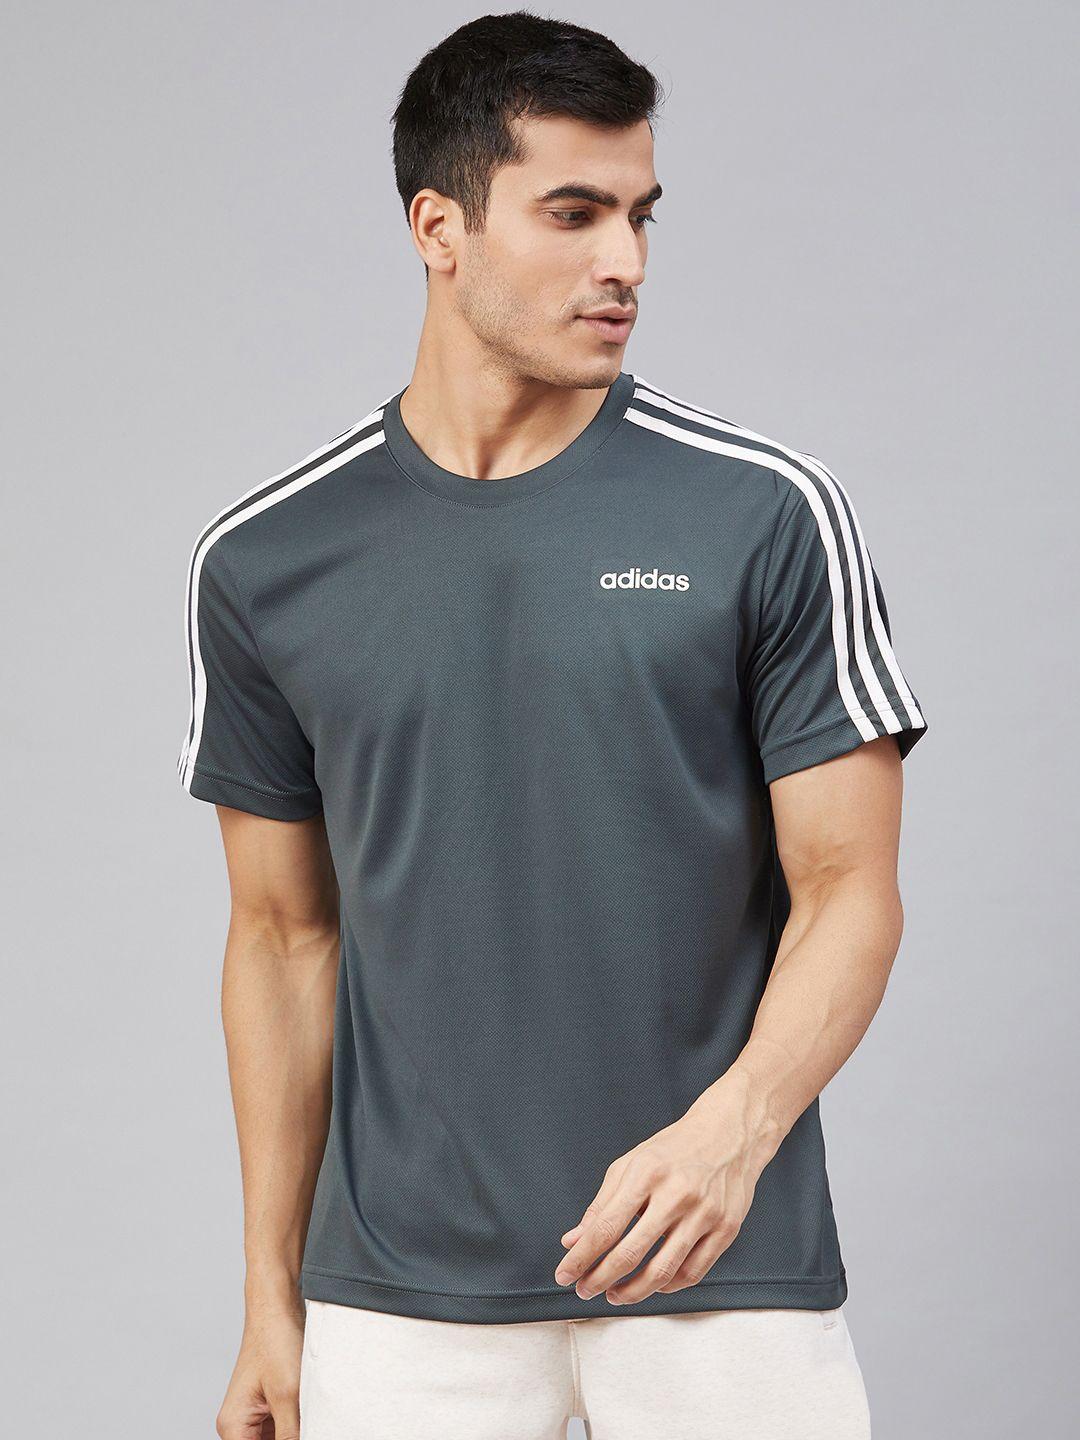 adidas men grey solid classic 3-stripes sustainable t-shirt